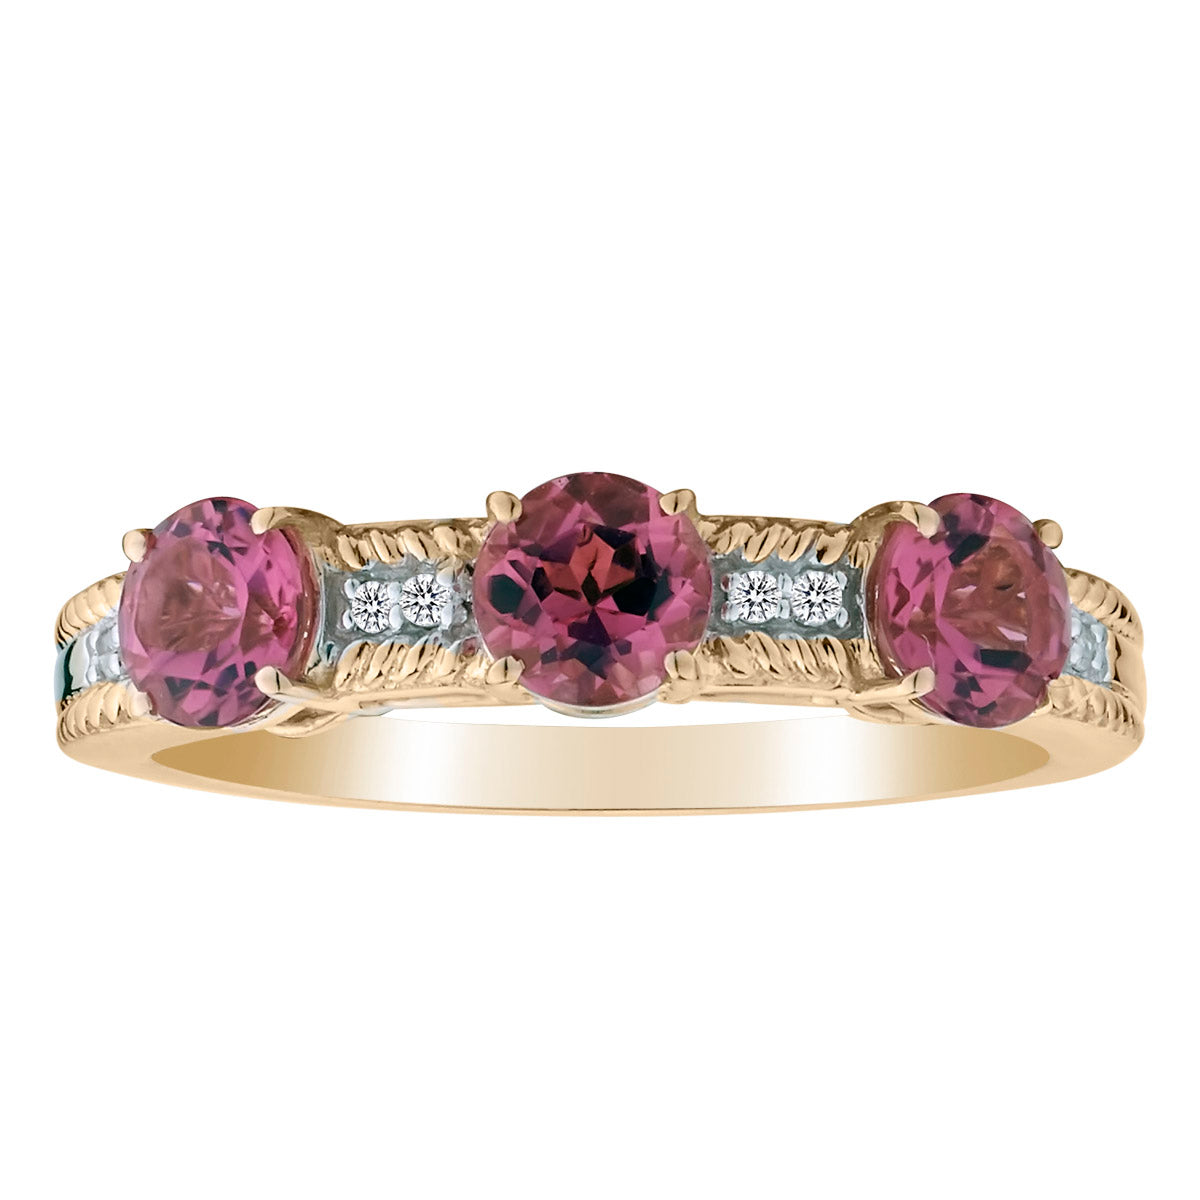 1.25 Genuine Pink Tourmaline "Past, Present, Future" Ring,  14kt Yellow Gold. Gemstone Rings. Griffin Jewellery Designs